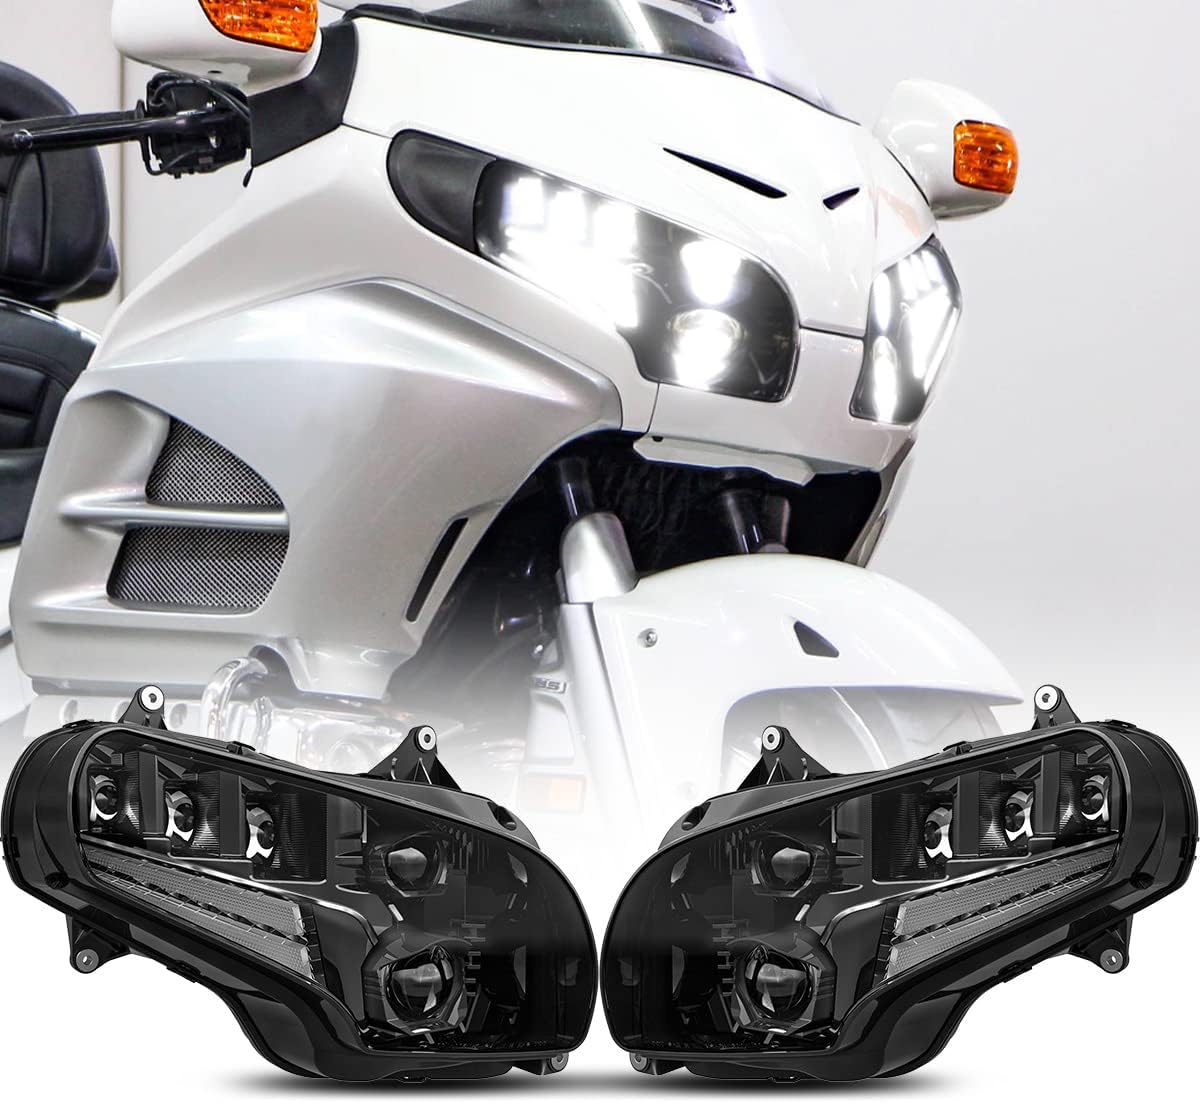 Motorcycle LED Headlights Assembly Full LED Performance Compatible with Honda Goldwing GL1800 2001 to 2017 Models High Low Beam DRL DOT SAE Approved Headlamps - Black